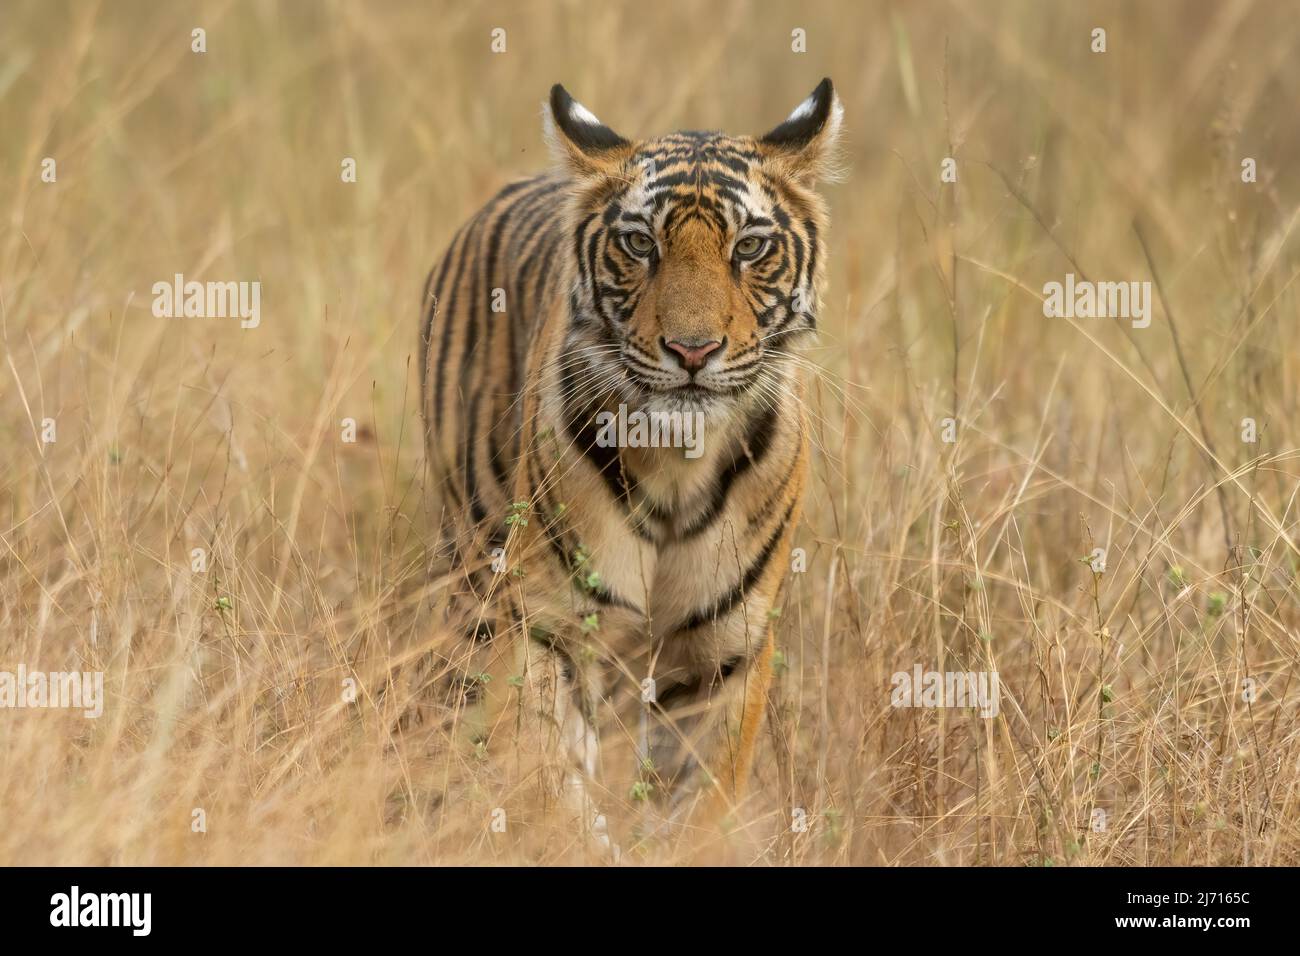 Portrait of sub-adult tiger standing in dry grass at Bandhavgarh National Park, India Stock Photo